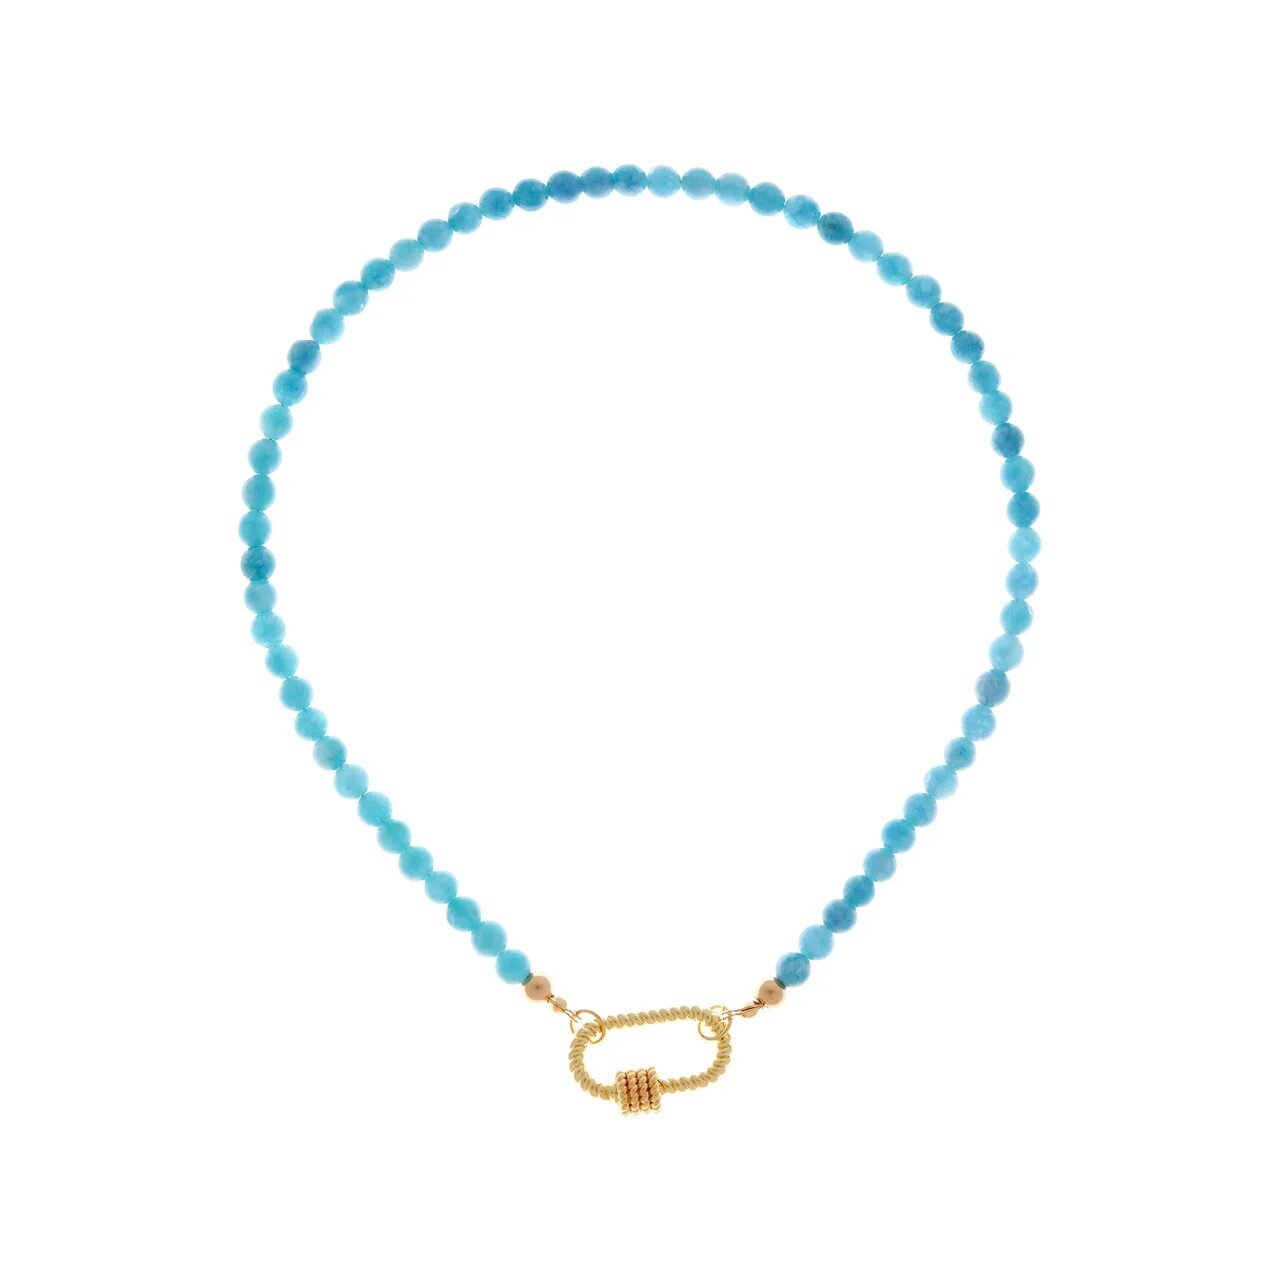 HOLLY JUNE Колье Carabiner Gold Turquoise Necklace holly june колье turquoise star necklace